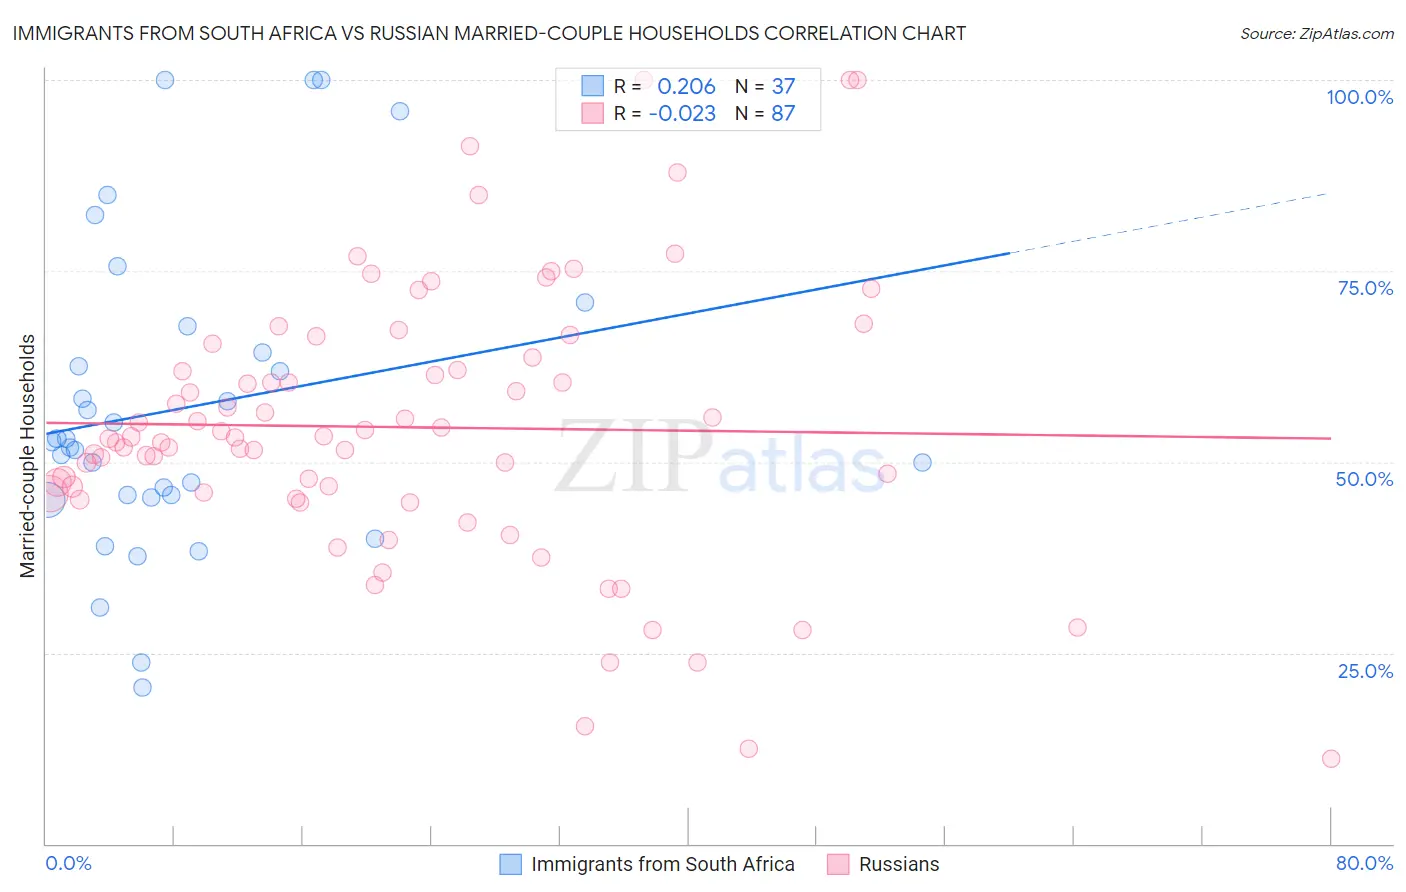 Immigrants from South Africa vs Russian Married-couple Households